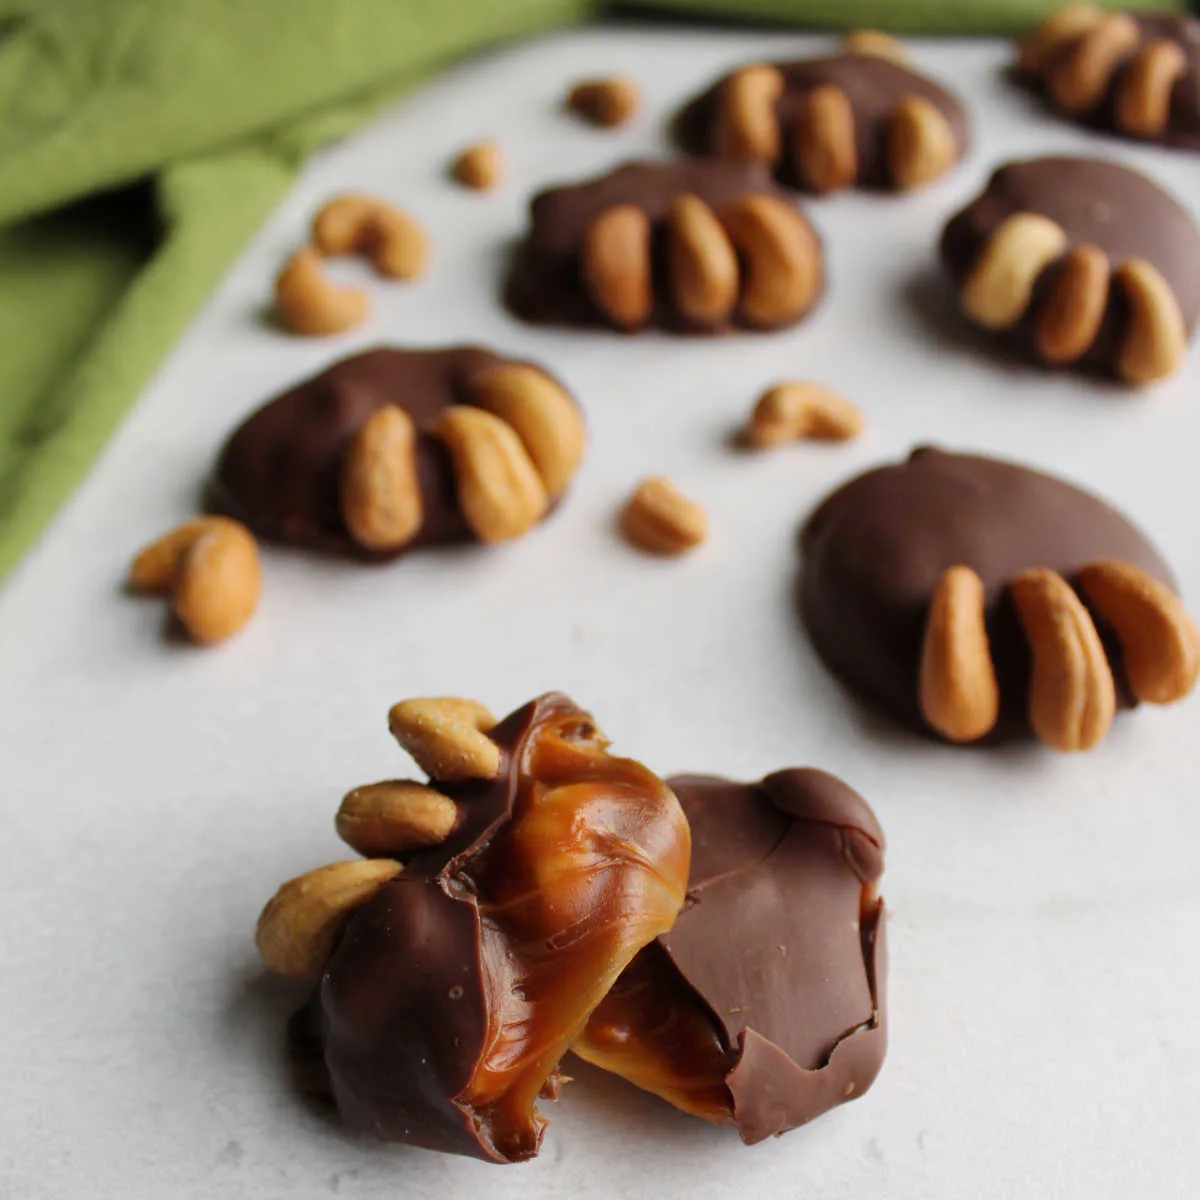 inside of bear paw candy with soft caramel showing and cashew claws.